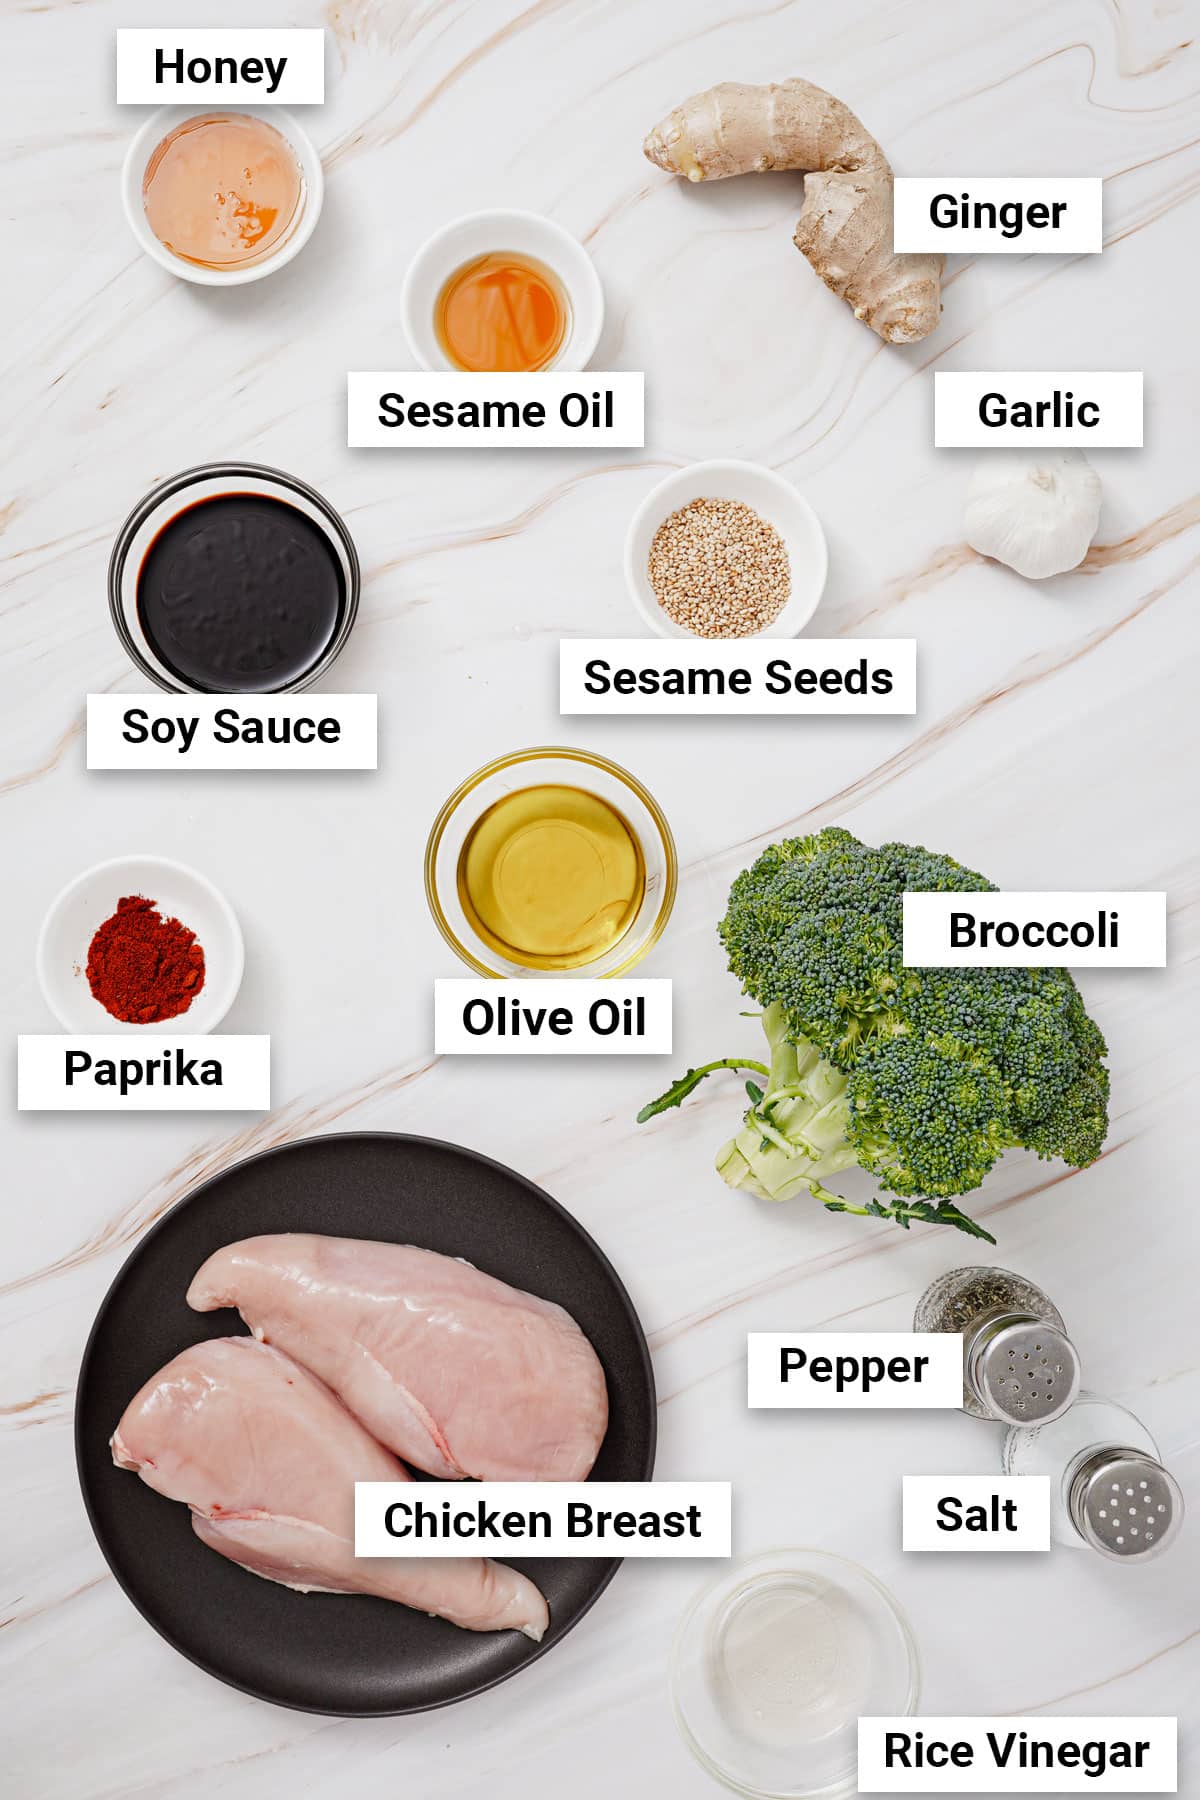 Ingredients for chicken and broccoli air fryer recipe